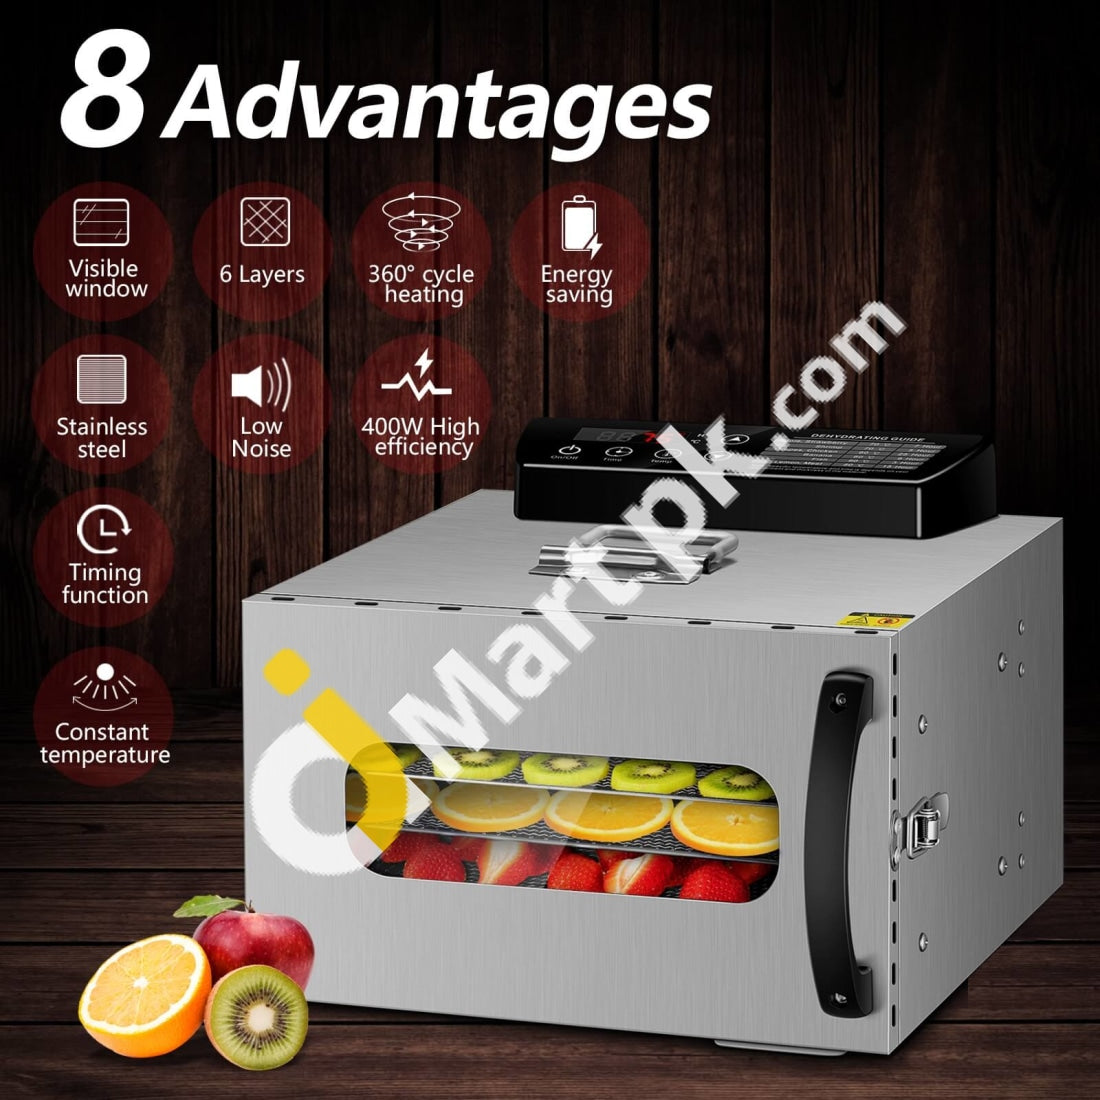 8 Tray Stainless Steel Electric Food Dehydrator Machine Fruit